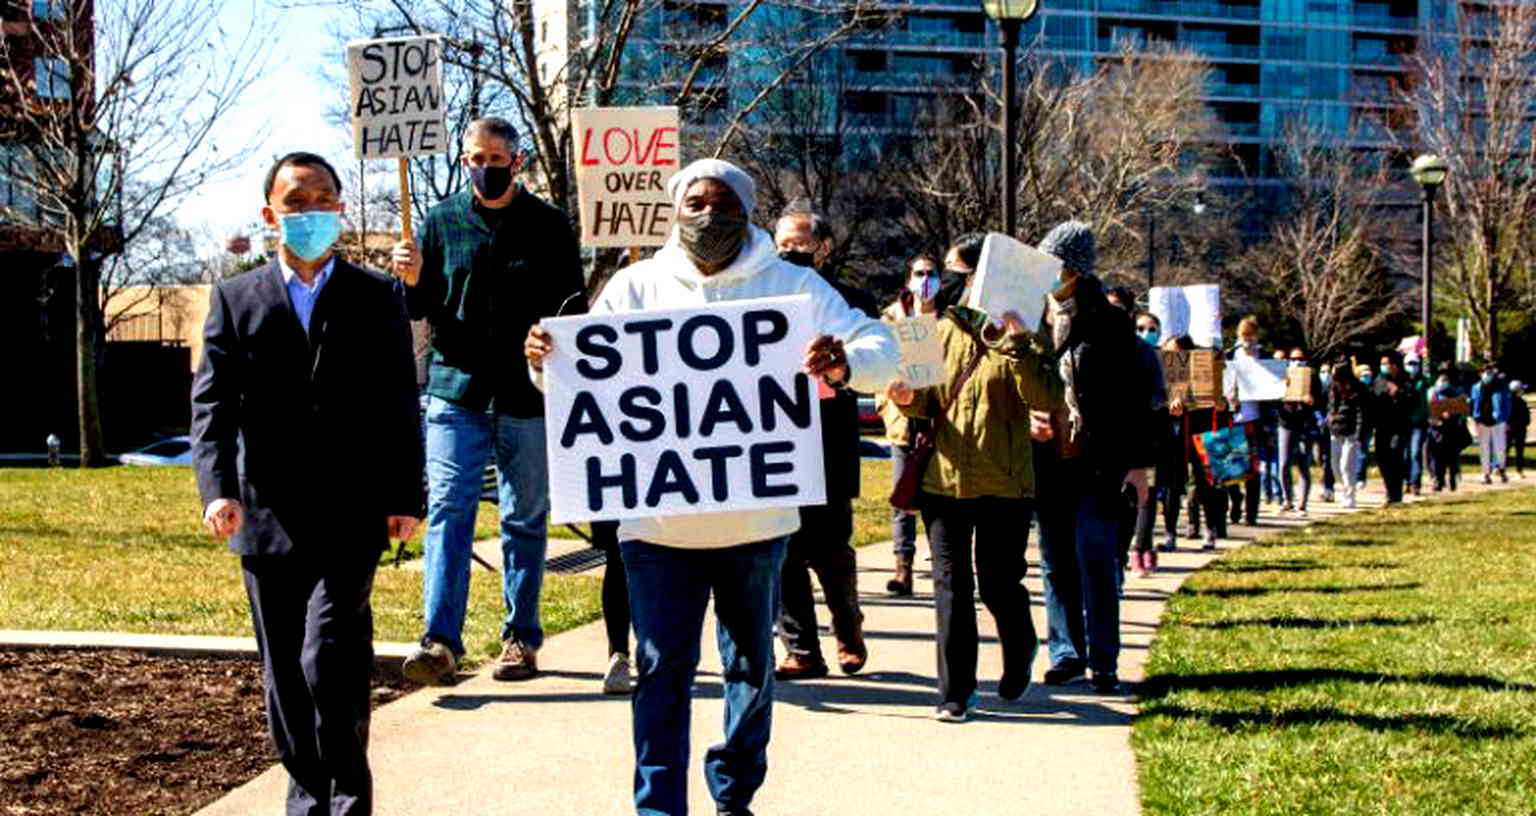 Hate crimes targeting Asian and Black people in U.S. reaches highest mark in 12 years